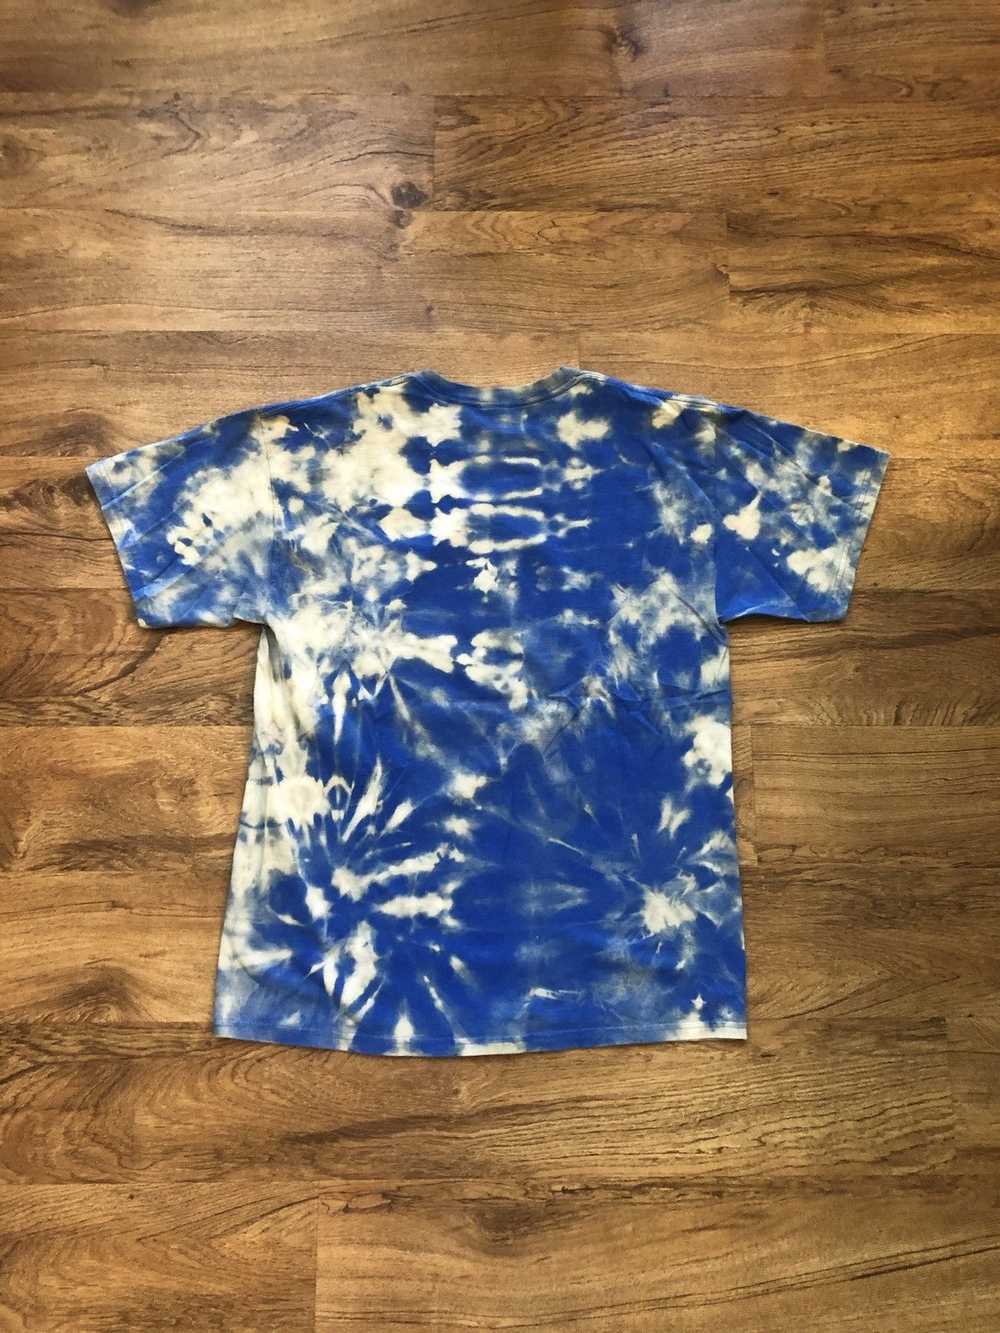 Vintage Bleach dyed Thing 1 T-Shirt - image 3